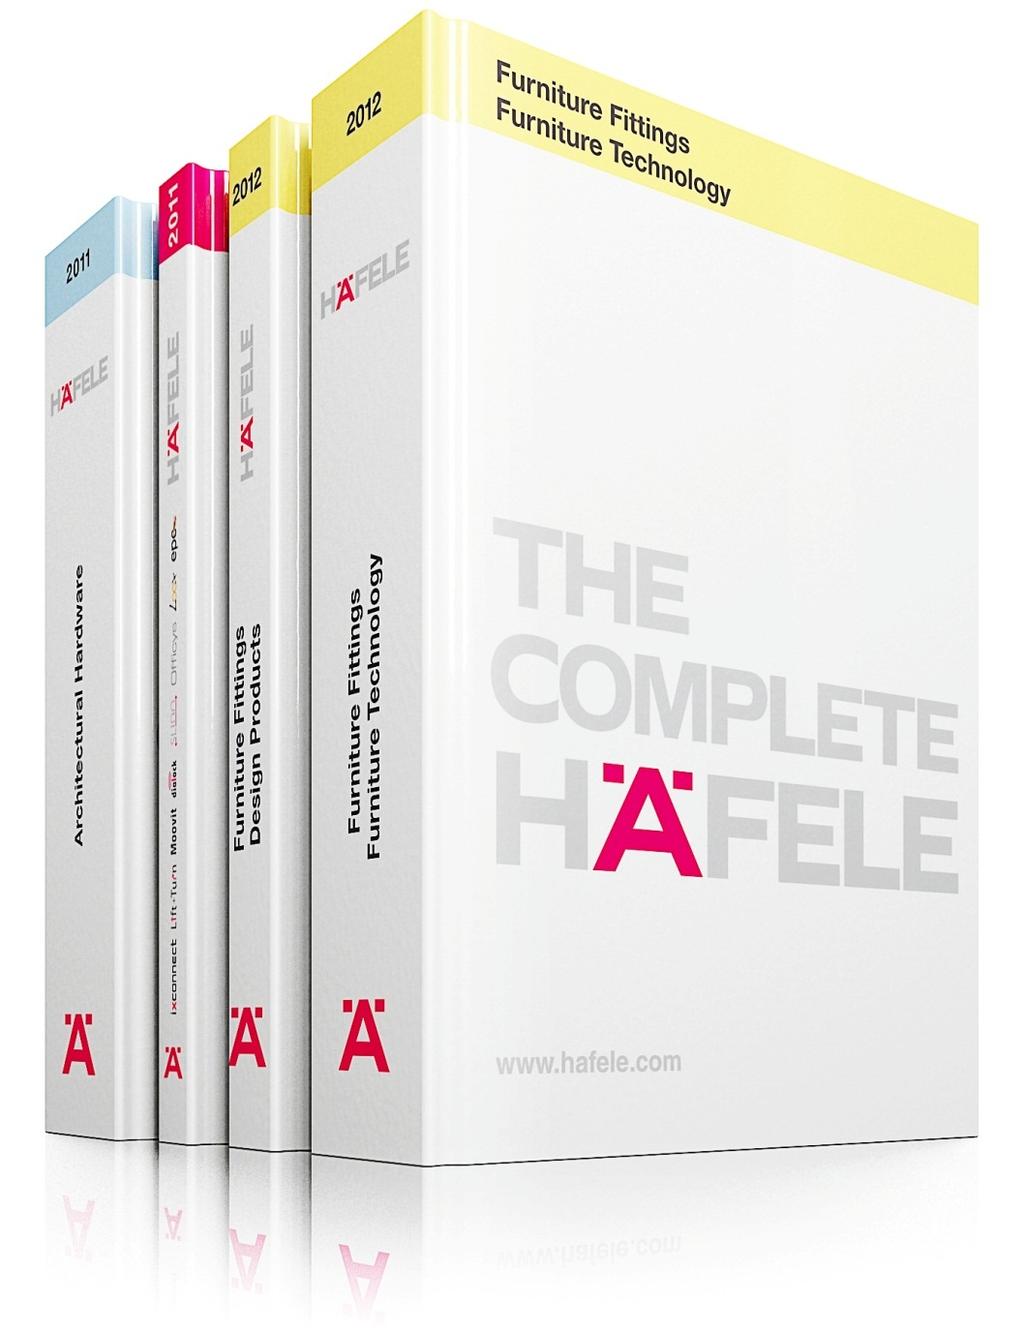 Häfele today The Complete Häfele The encyclopaedia for hardware technology Broad product range... More than 43,000 articles listed in the catalogue.